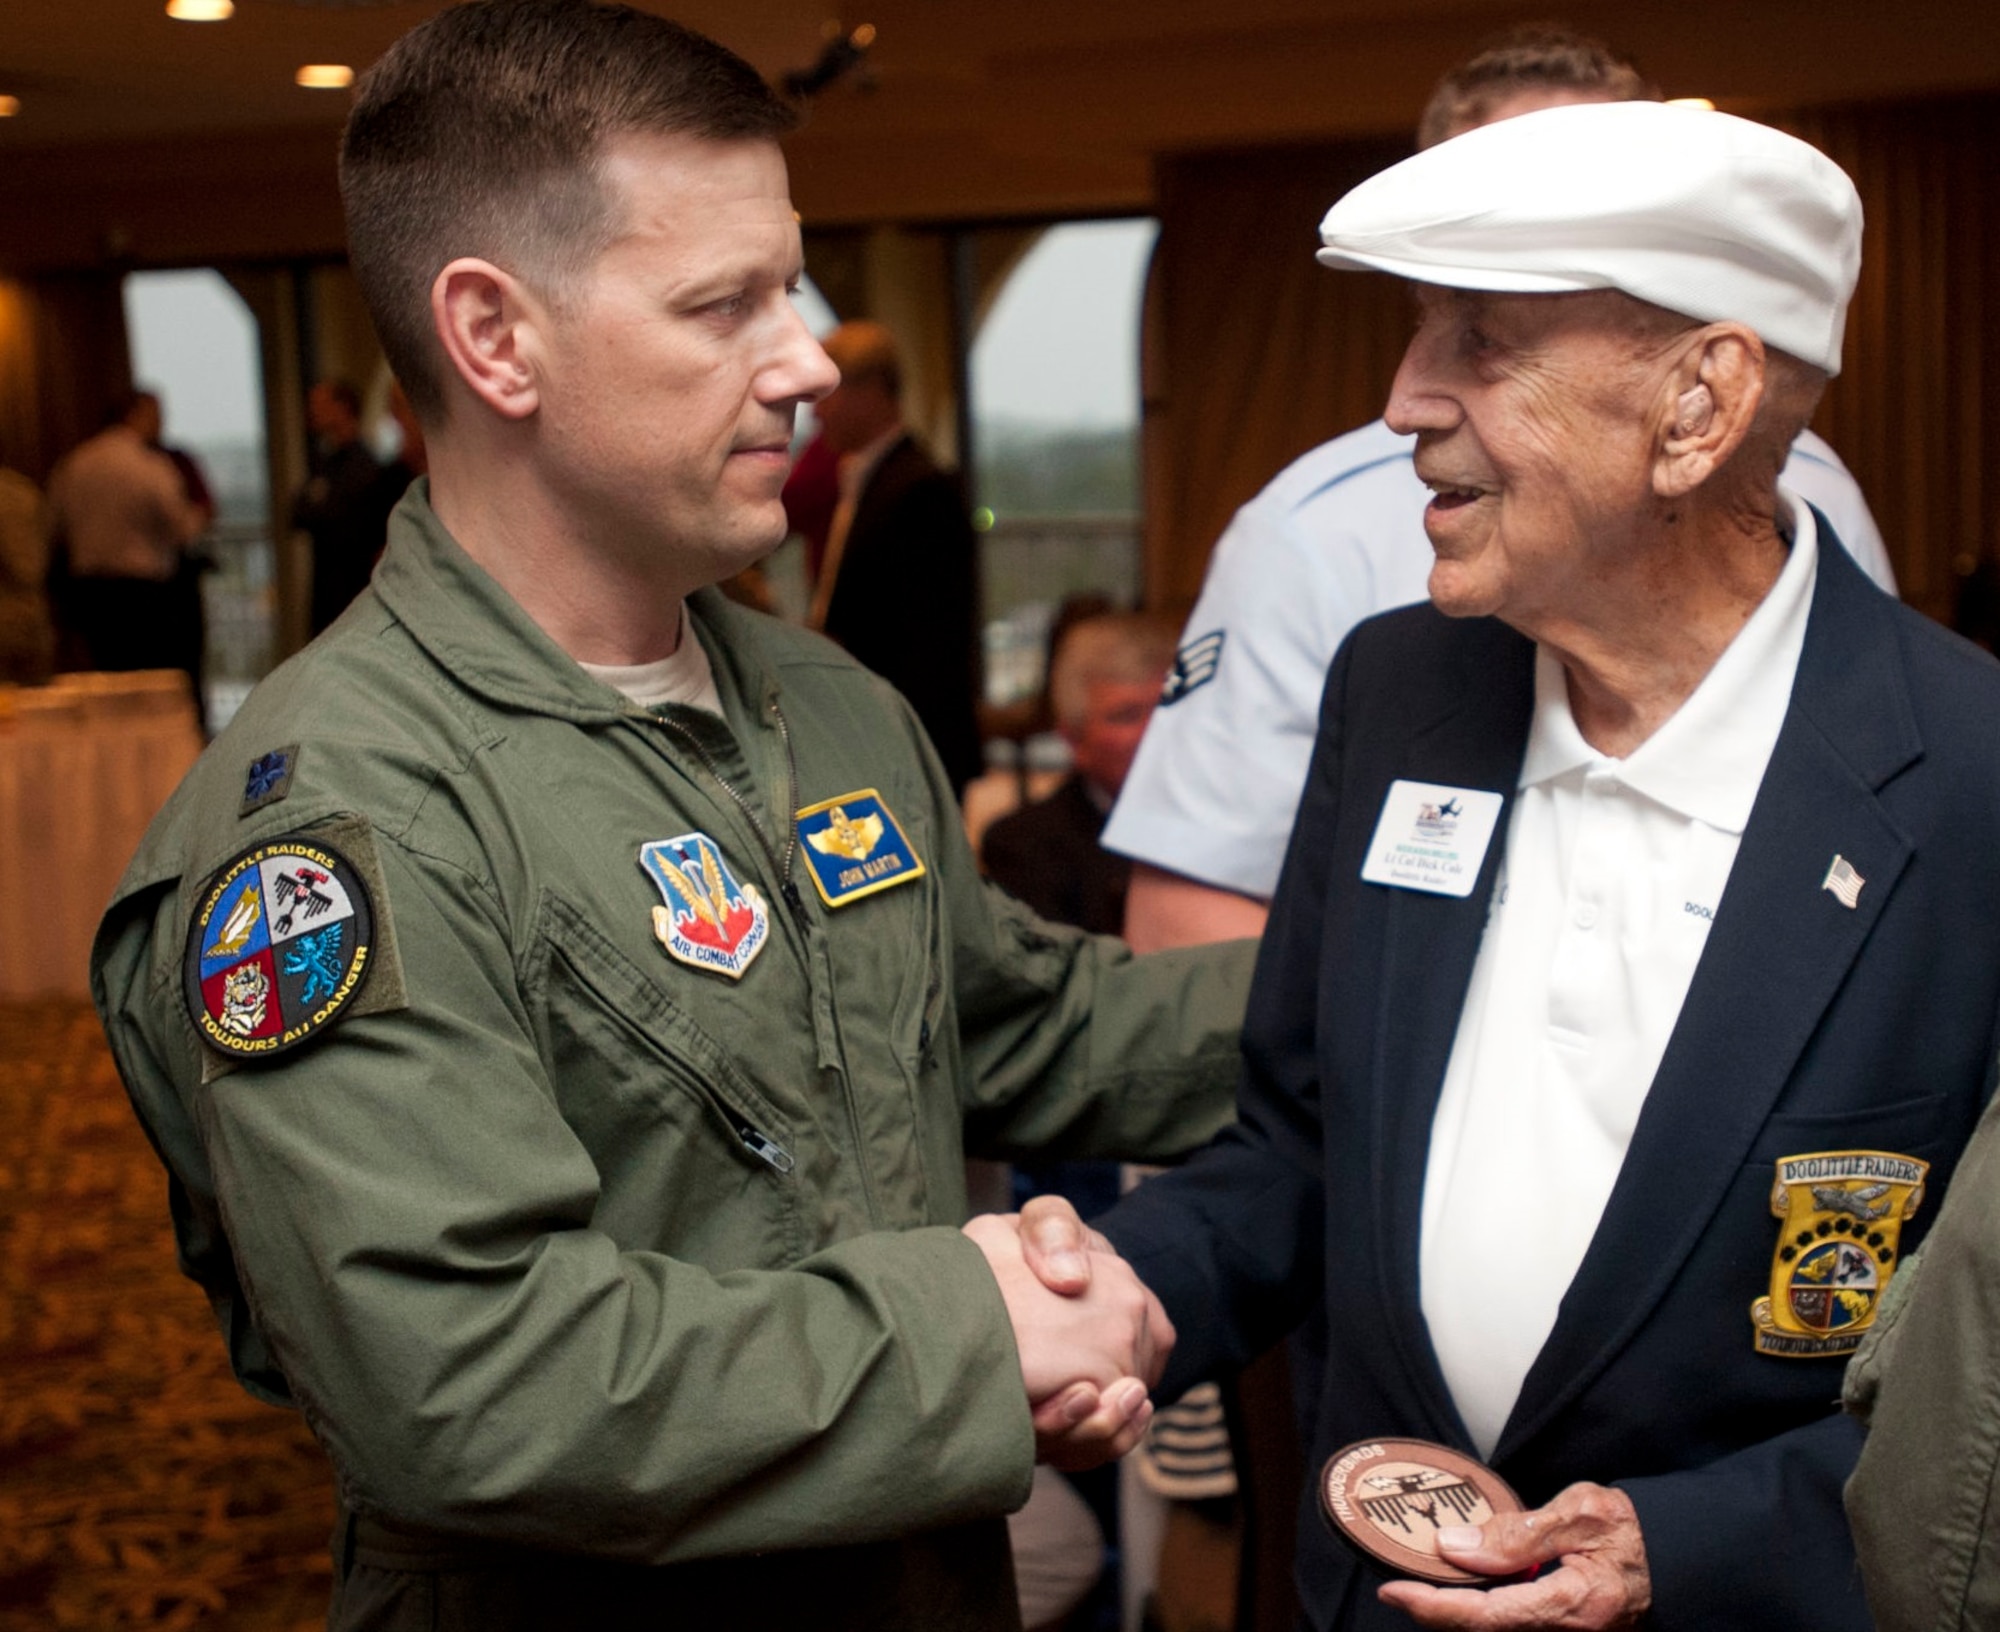 Then Lt. Col. John Martin, commander of the 28th Operations Group, talks with retired Lt. Col. Dick Cole, one of the original Doolittle Raiders during a special event at Fort Walton Beach, Florida, April 19, 2013. Reflecting on the 100th anniversary of two of the original squadrons that participated in the historic raid - the 34th Bomb Squadron and 37th Bomb Squadron - Martin noted the Doolittle Raid is the cornerstones of our bomberheritage. (U.S. Air Force Photo by Senior Airman Carlin Leslie)